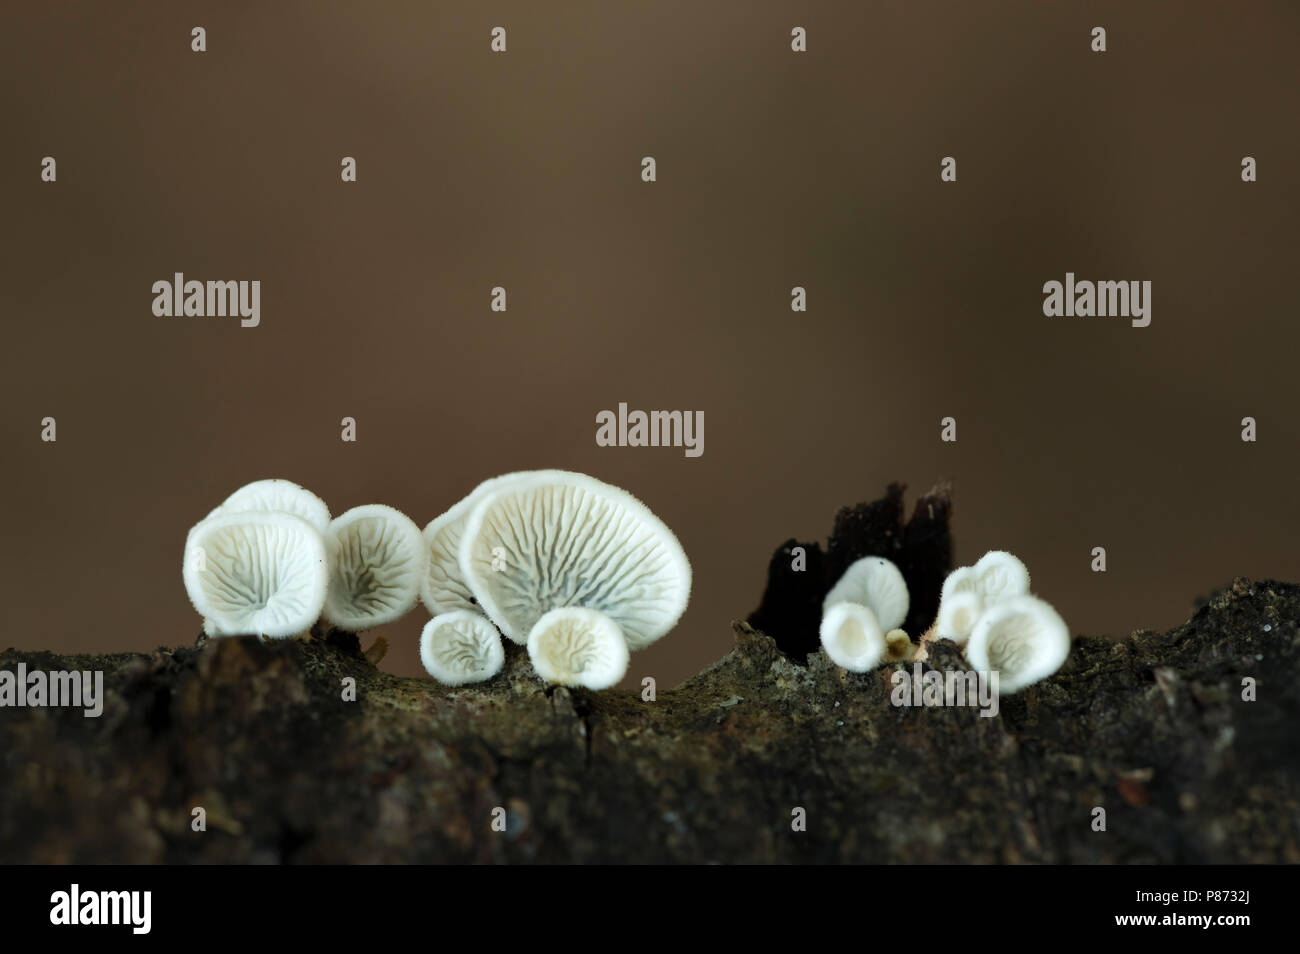 Plooivlieswaaiertje; Crimped Gill Fungus; Stock Photo